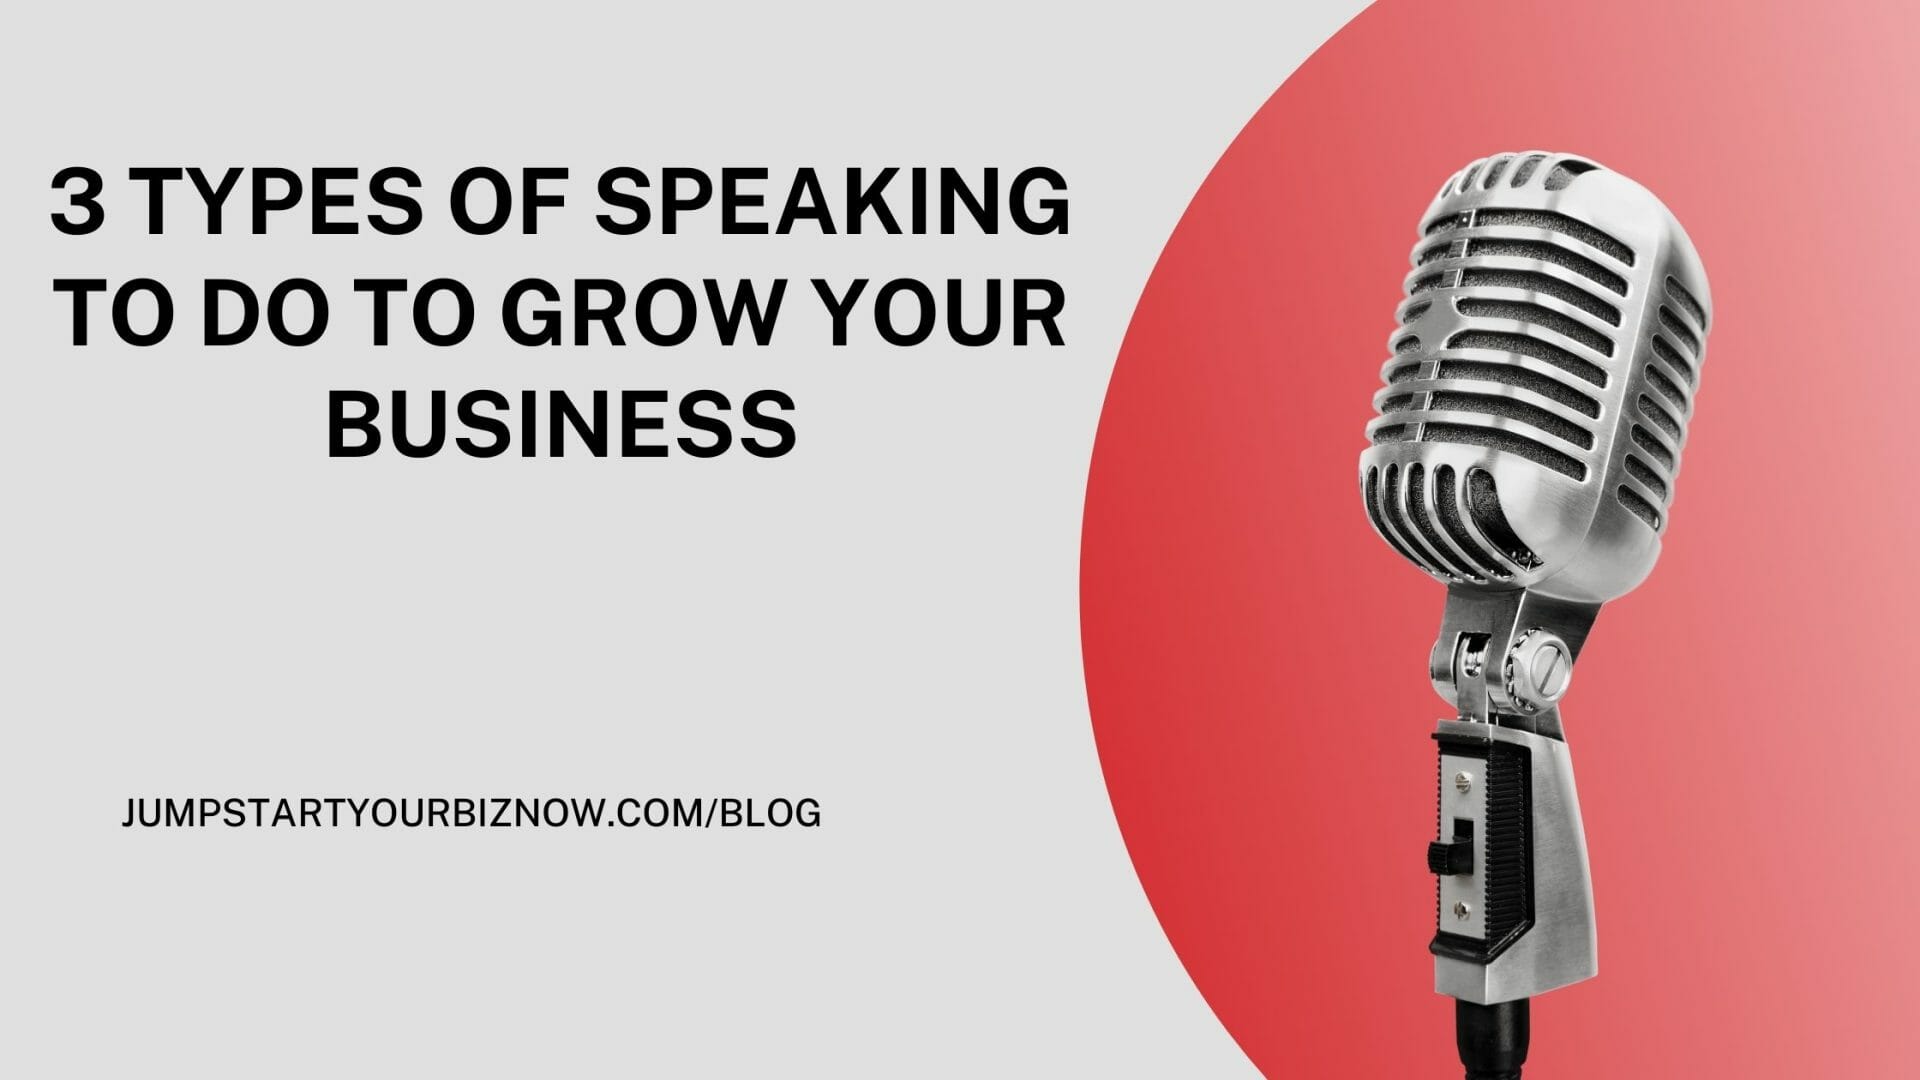 3 Types of Speaking to Do to Grow Your Business